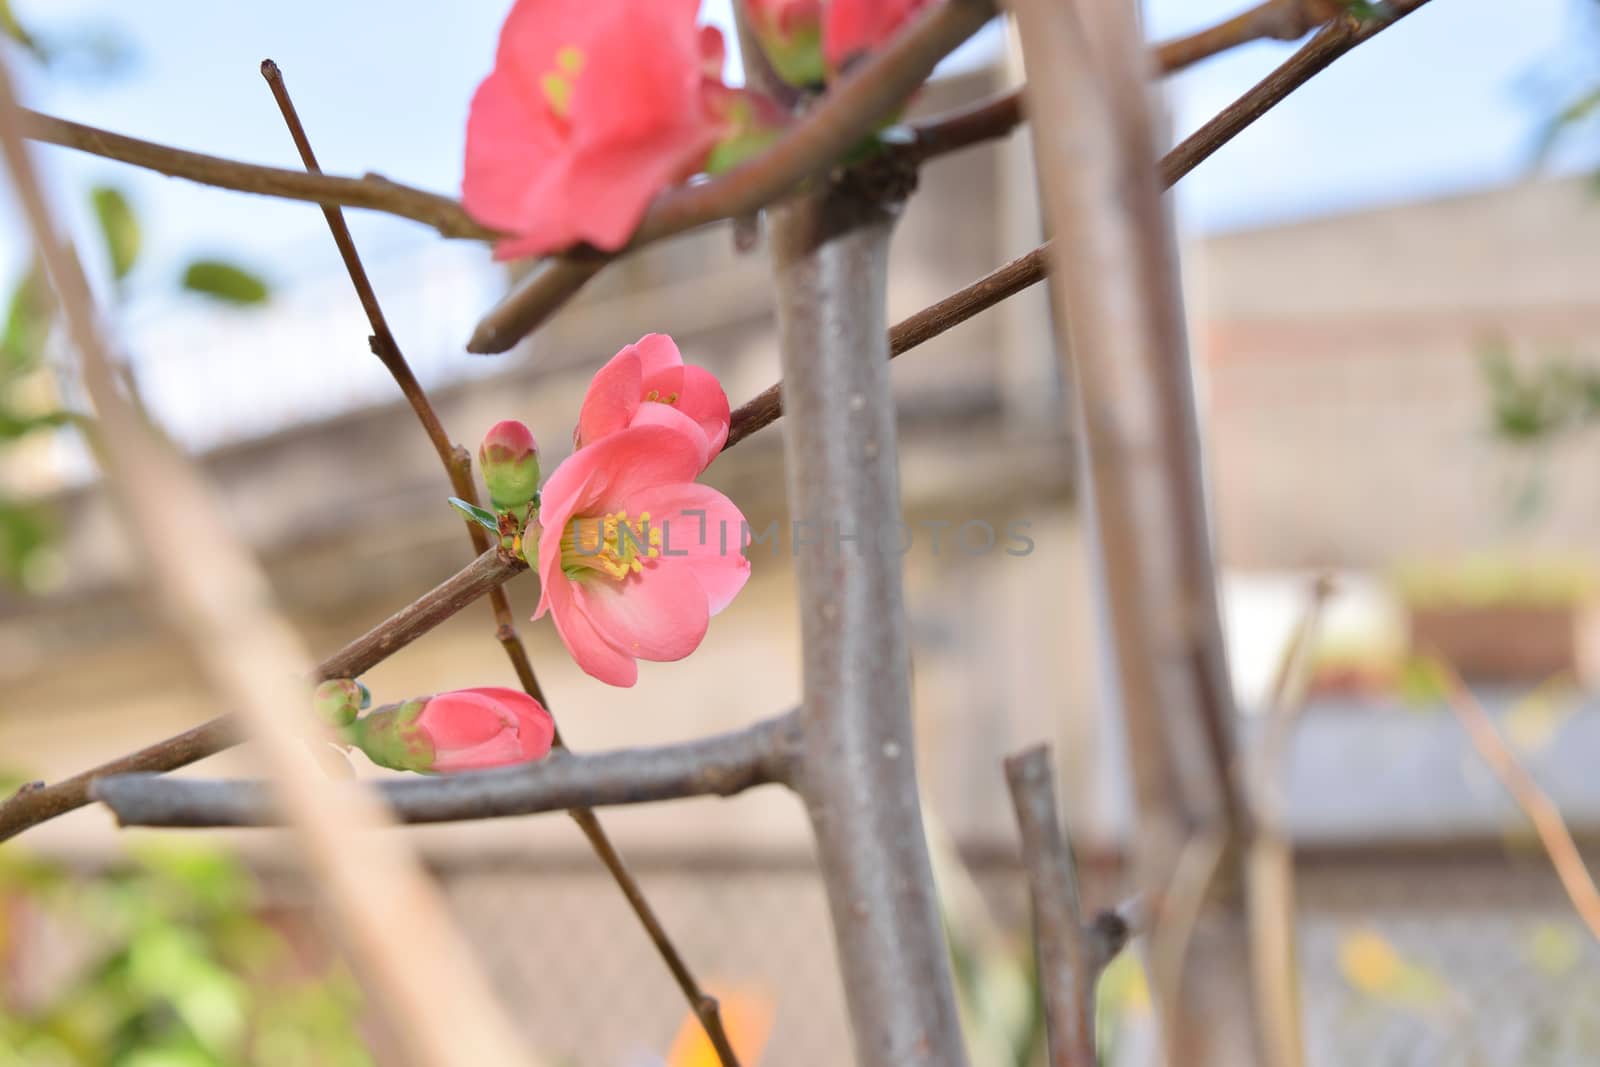 First buds and first blooms of early spring